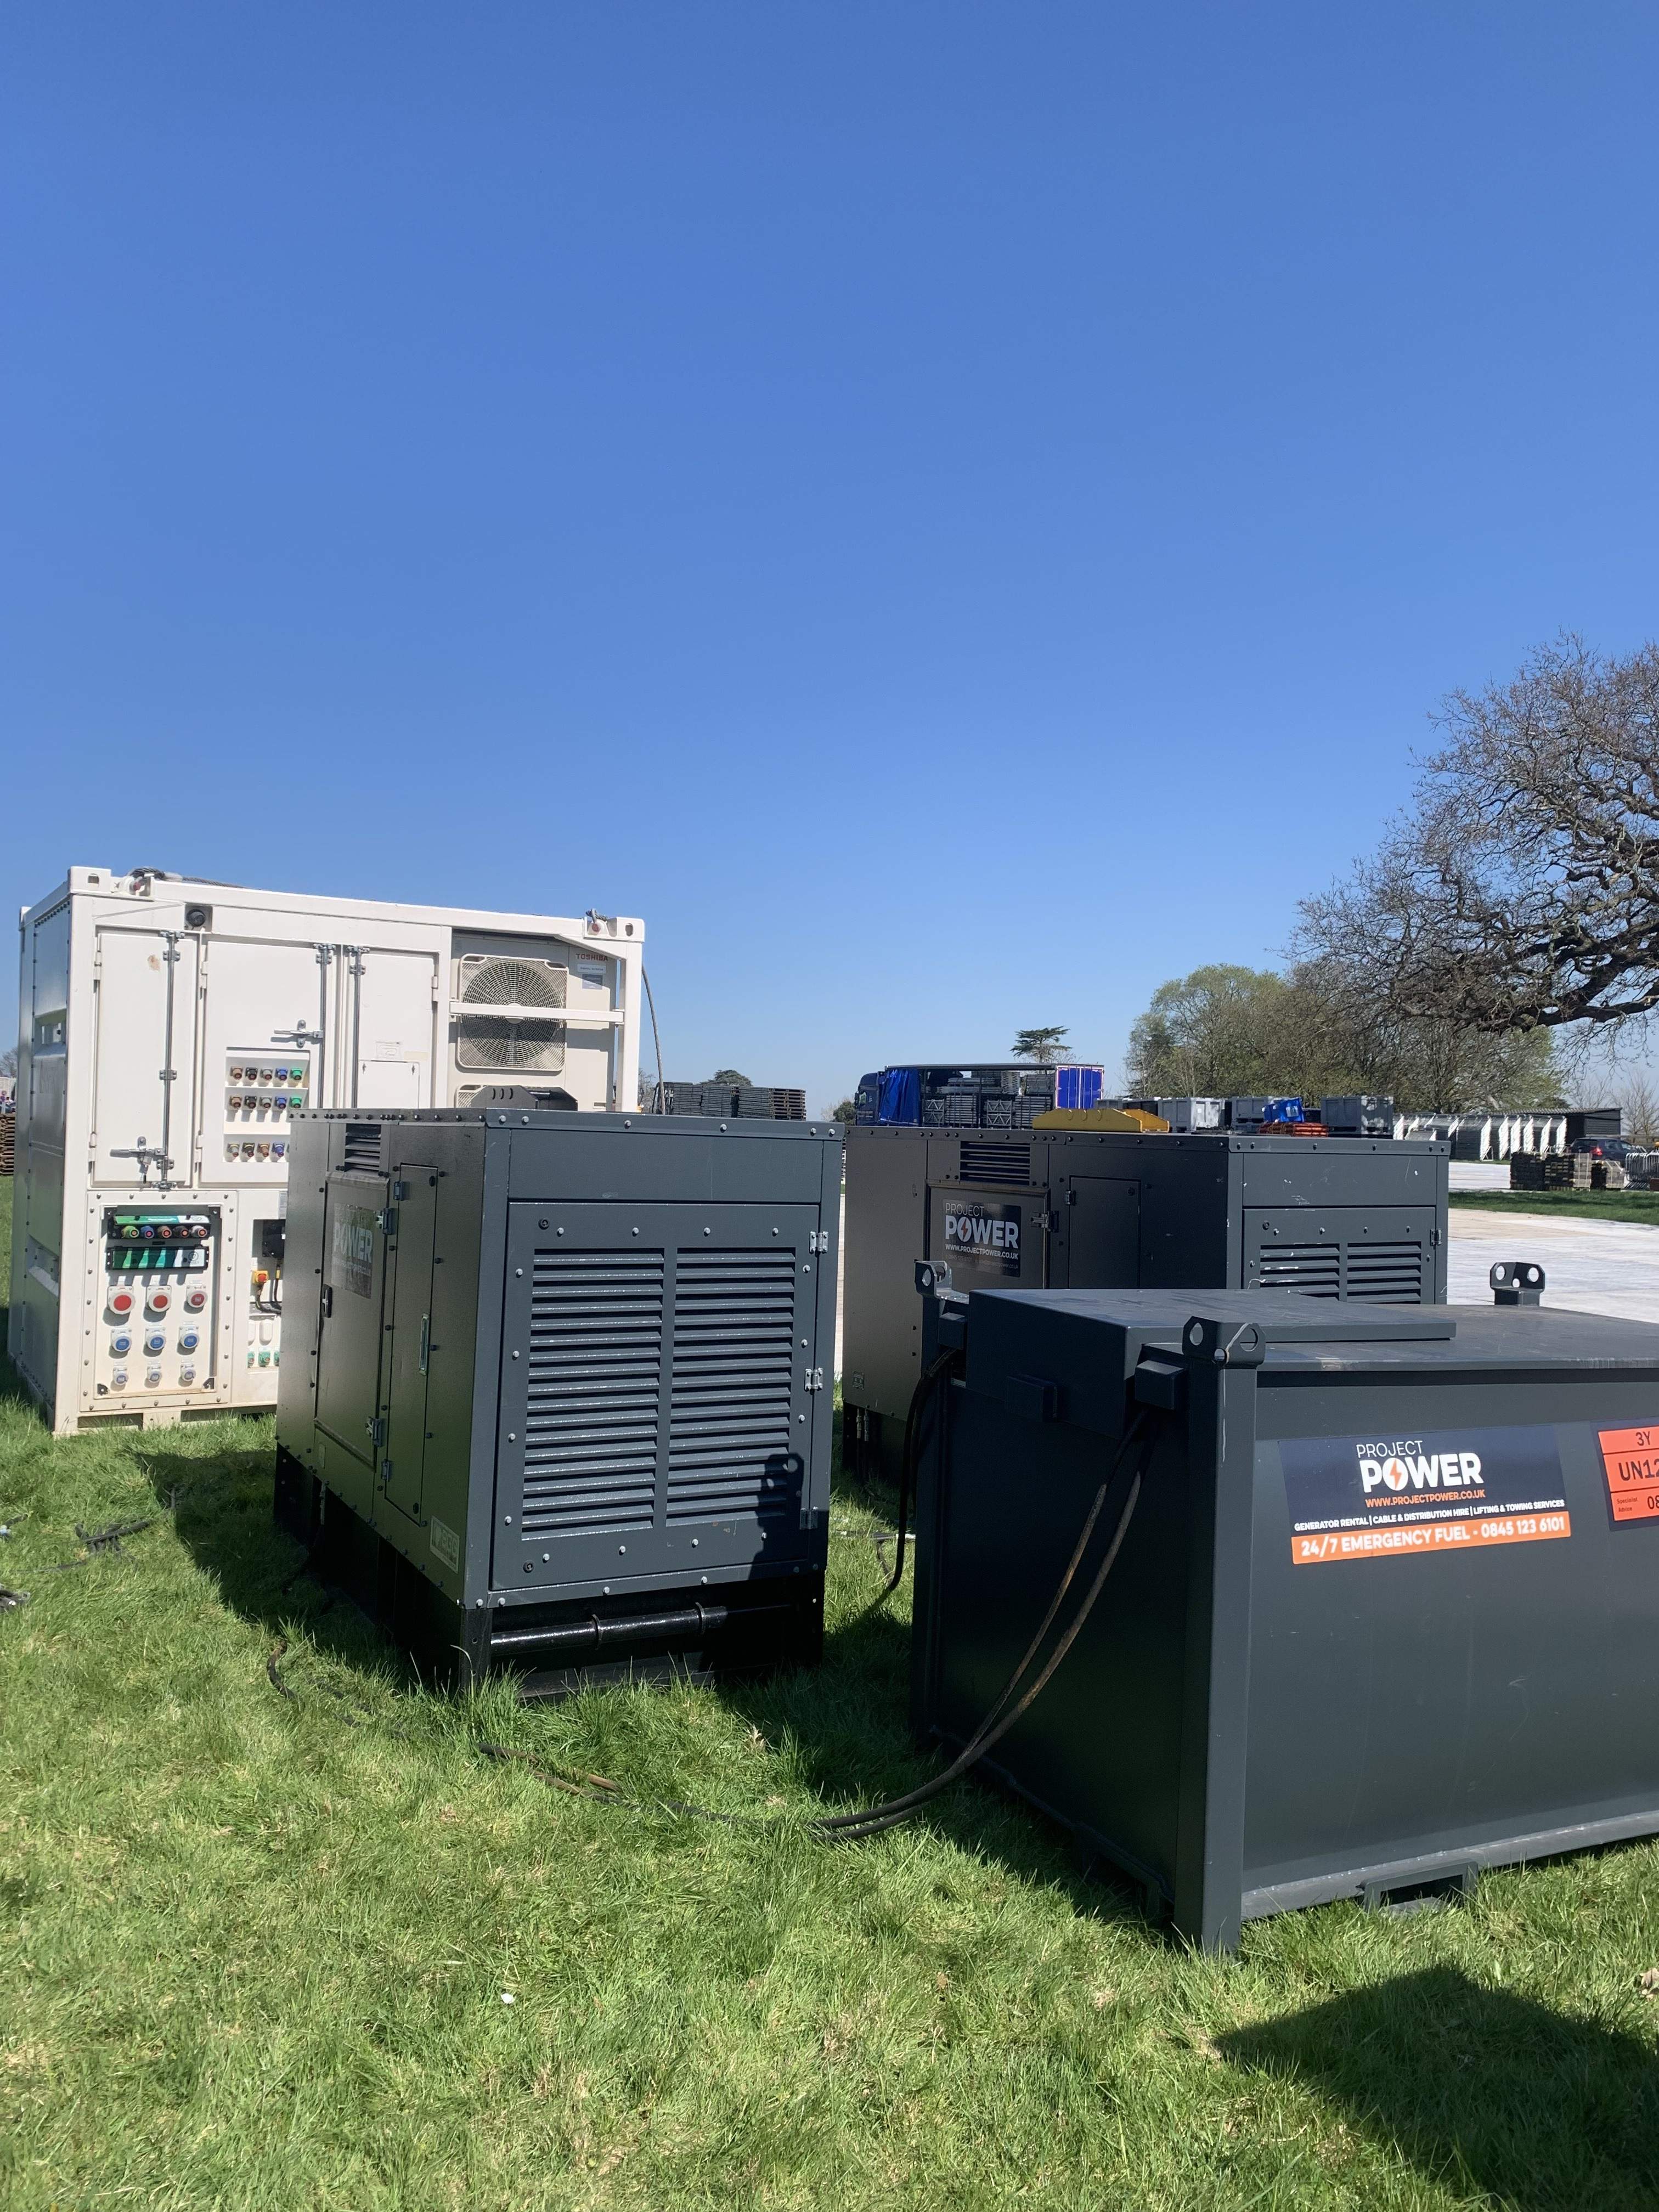 Portable power support for emergency response by top battery storage optimisation developers, UK and Ireland